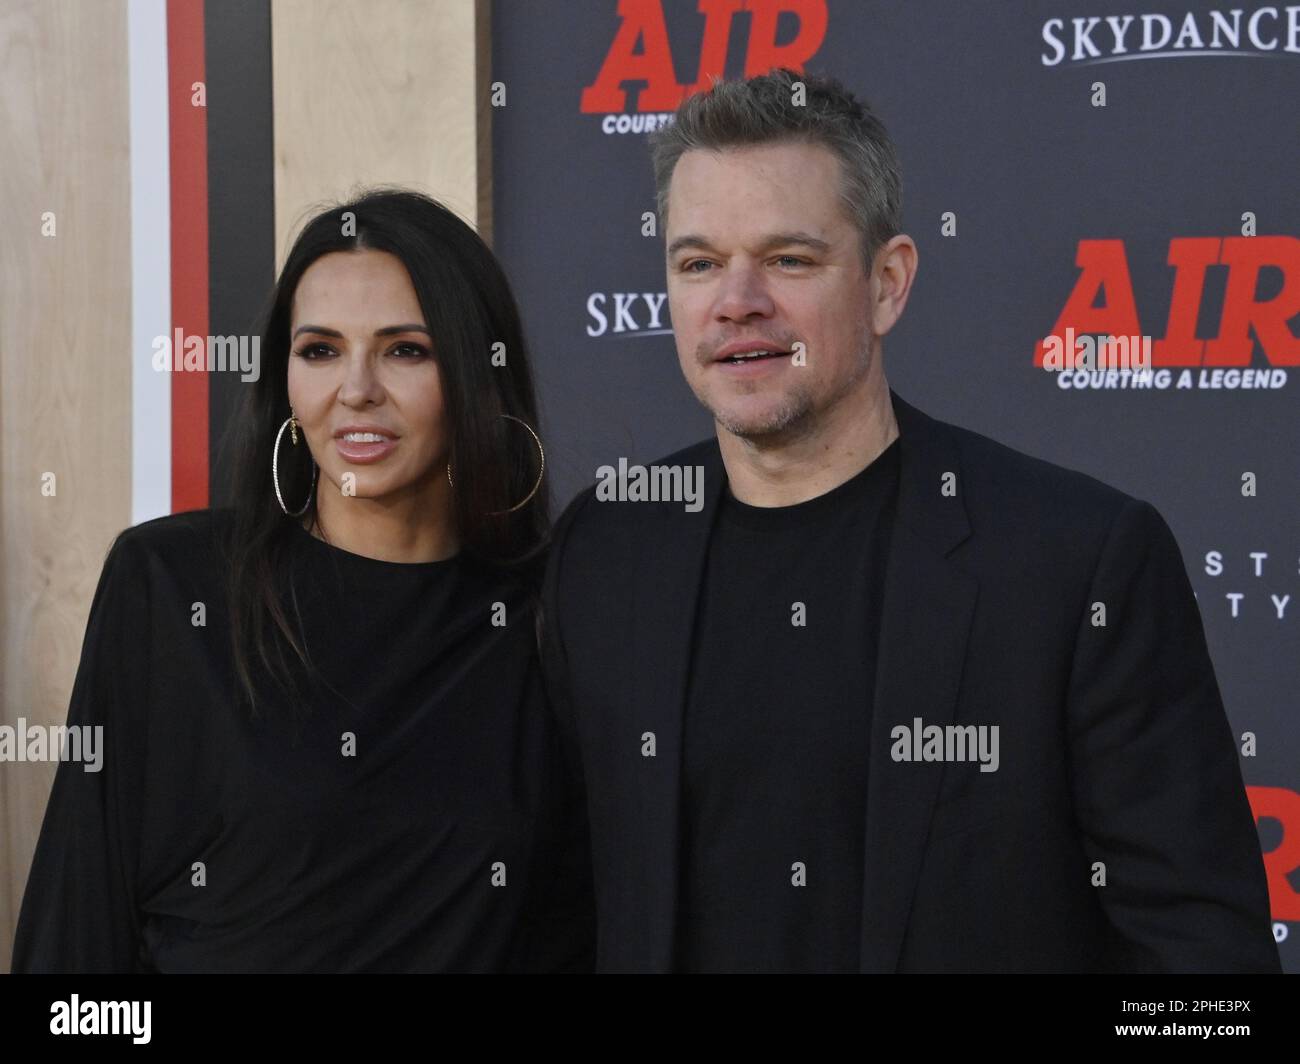 Los Angeles, United States. 27th Mar, 2023. Cast member Matt Damon and his wife Luciana Barroso attend the premiere of the motion picture drama 'Air' at the regency Village Theatre in the Westwood section of Los Angeles on Monday, March 27, 2023. Storyline: Follows the history of shoe salesman Sonny Vaccaro, and how he led Nike in its pursuit of the greatest athlete in the history of basketball: Michael Jordan. Photo by Jim Ruymen/UPI Credit: UPI/Alamy Live News Stock Photo